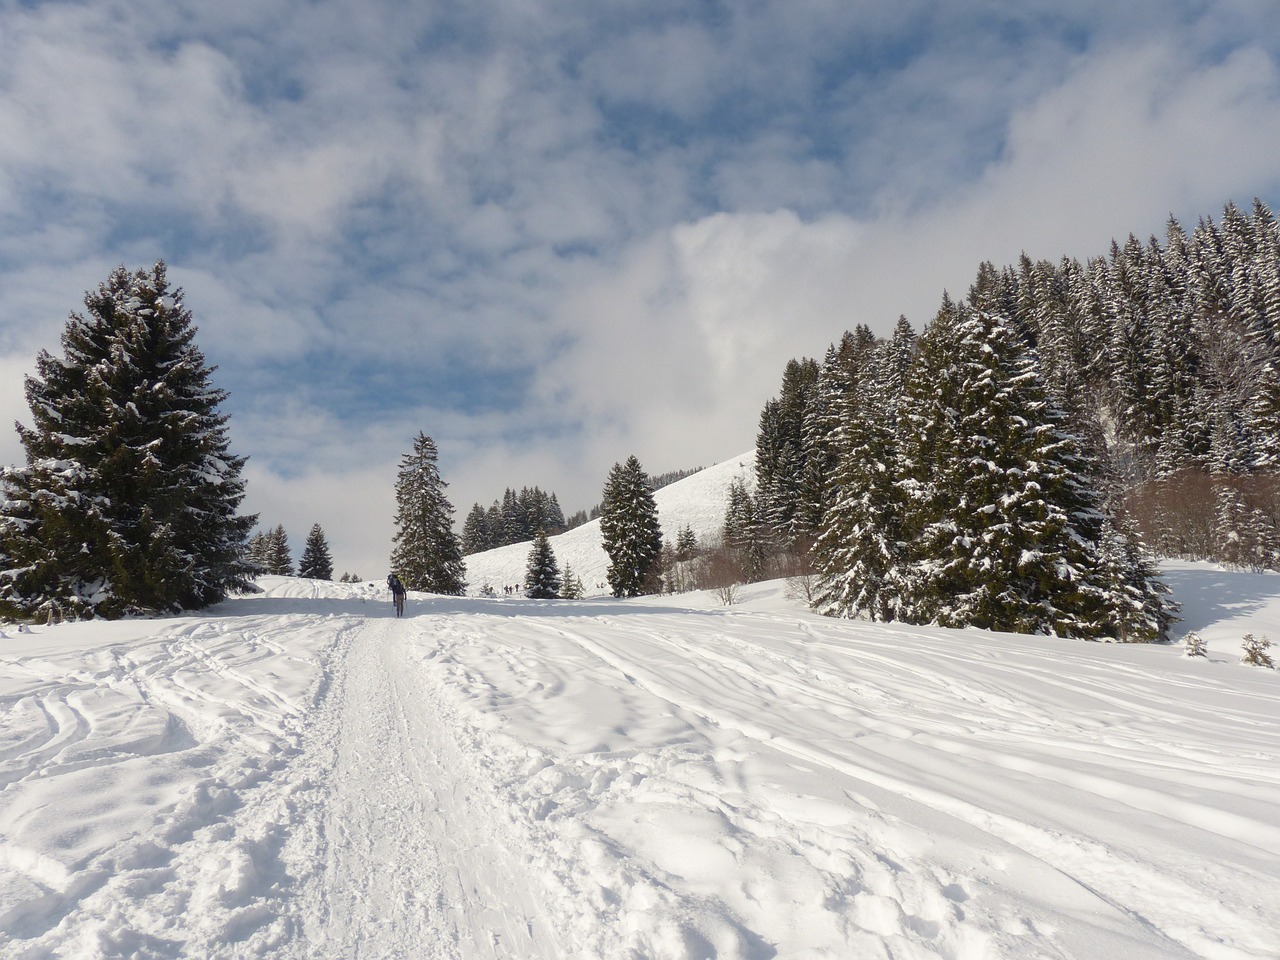 a man riding a snowboard down a snow covered slope, a picture, pixabay, les nabis, fir trees, road, sparse winter landscape, wikimedia commons